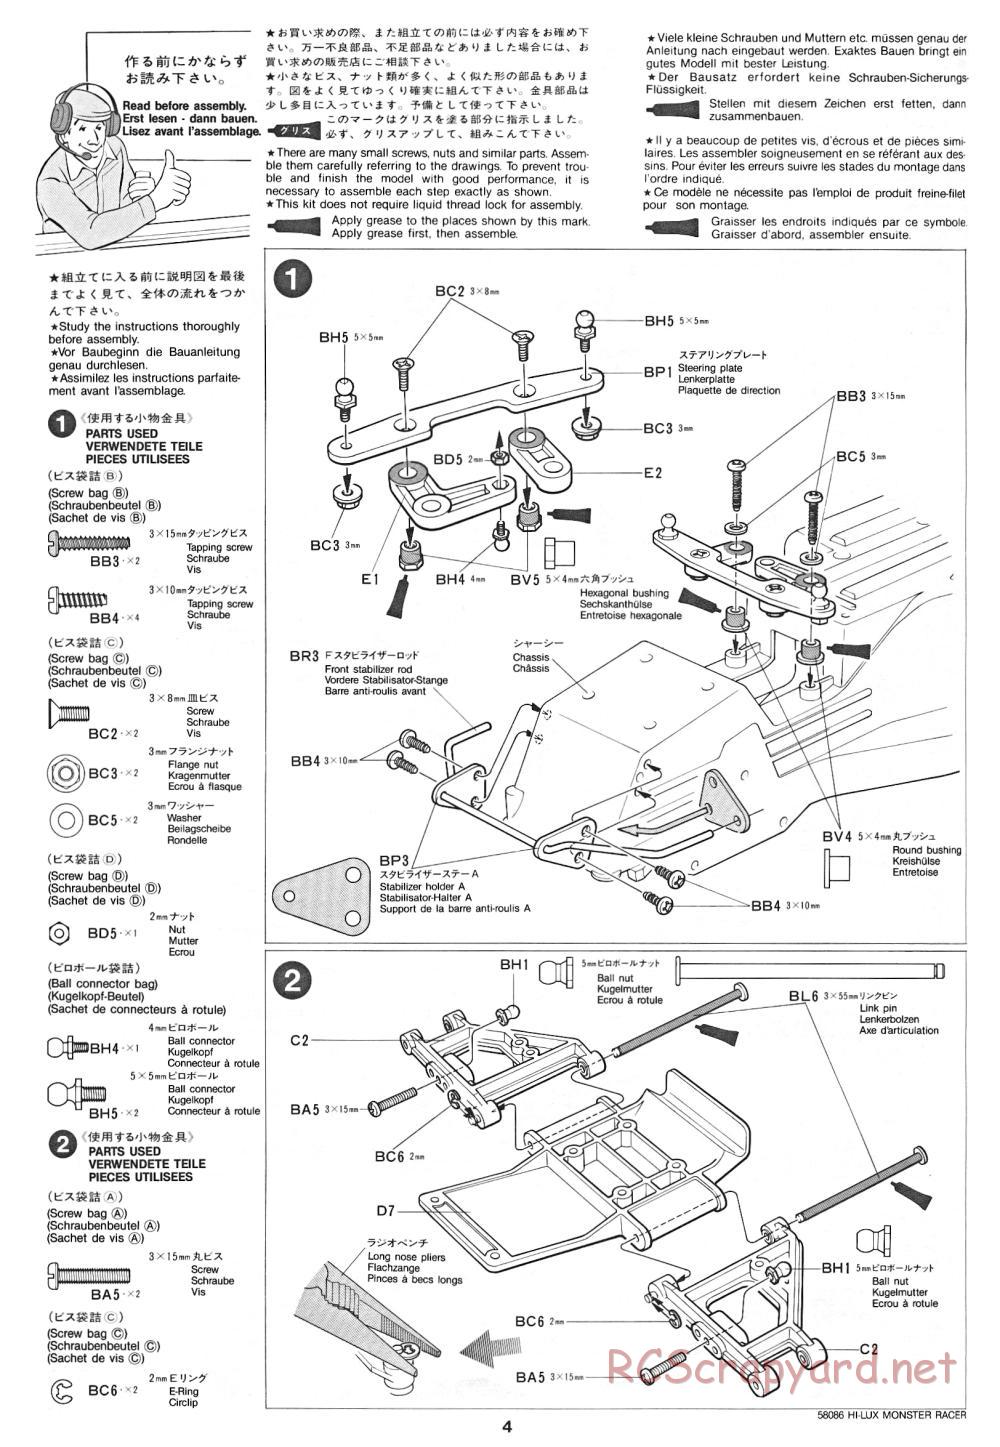 Tamiya - Toyota Hilux Monster Racer - 58086 - Manual - Page 4